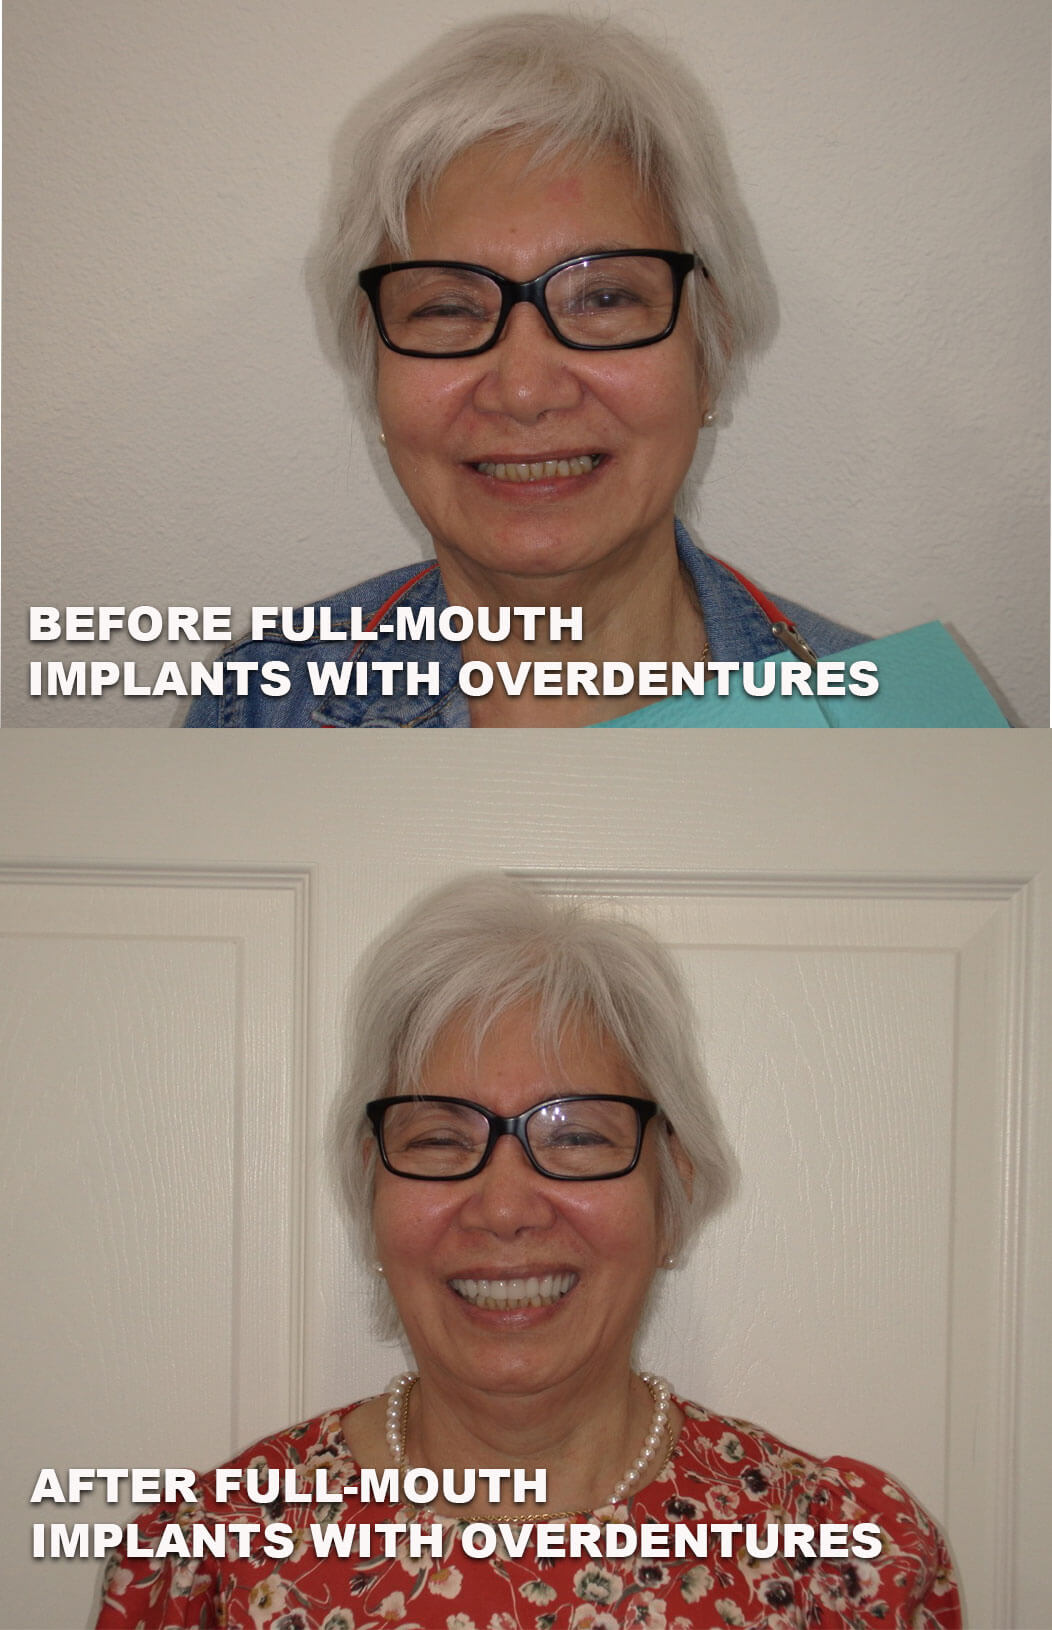 Before and after full mouth implants with overdentures